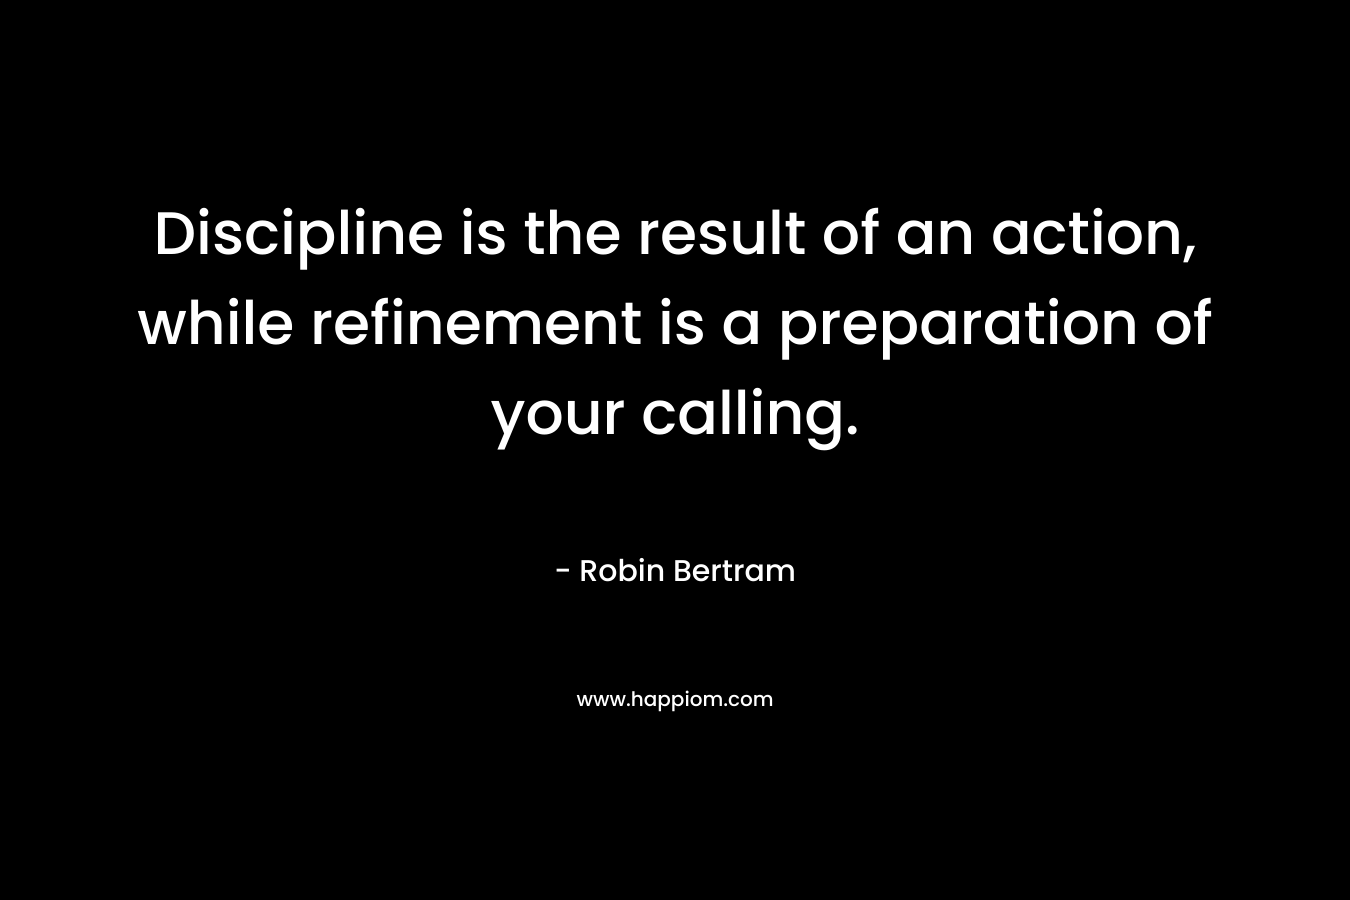 Discipline is the result of an action, while refinement is a preparation of your calling. – Robin Bertram